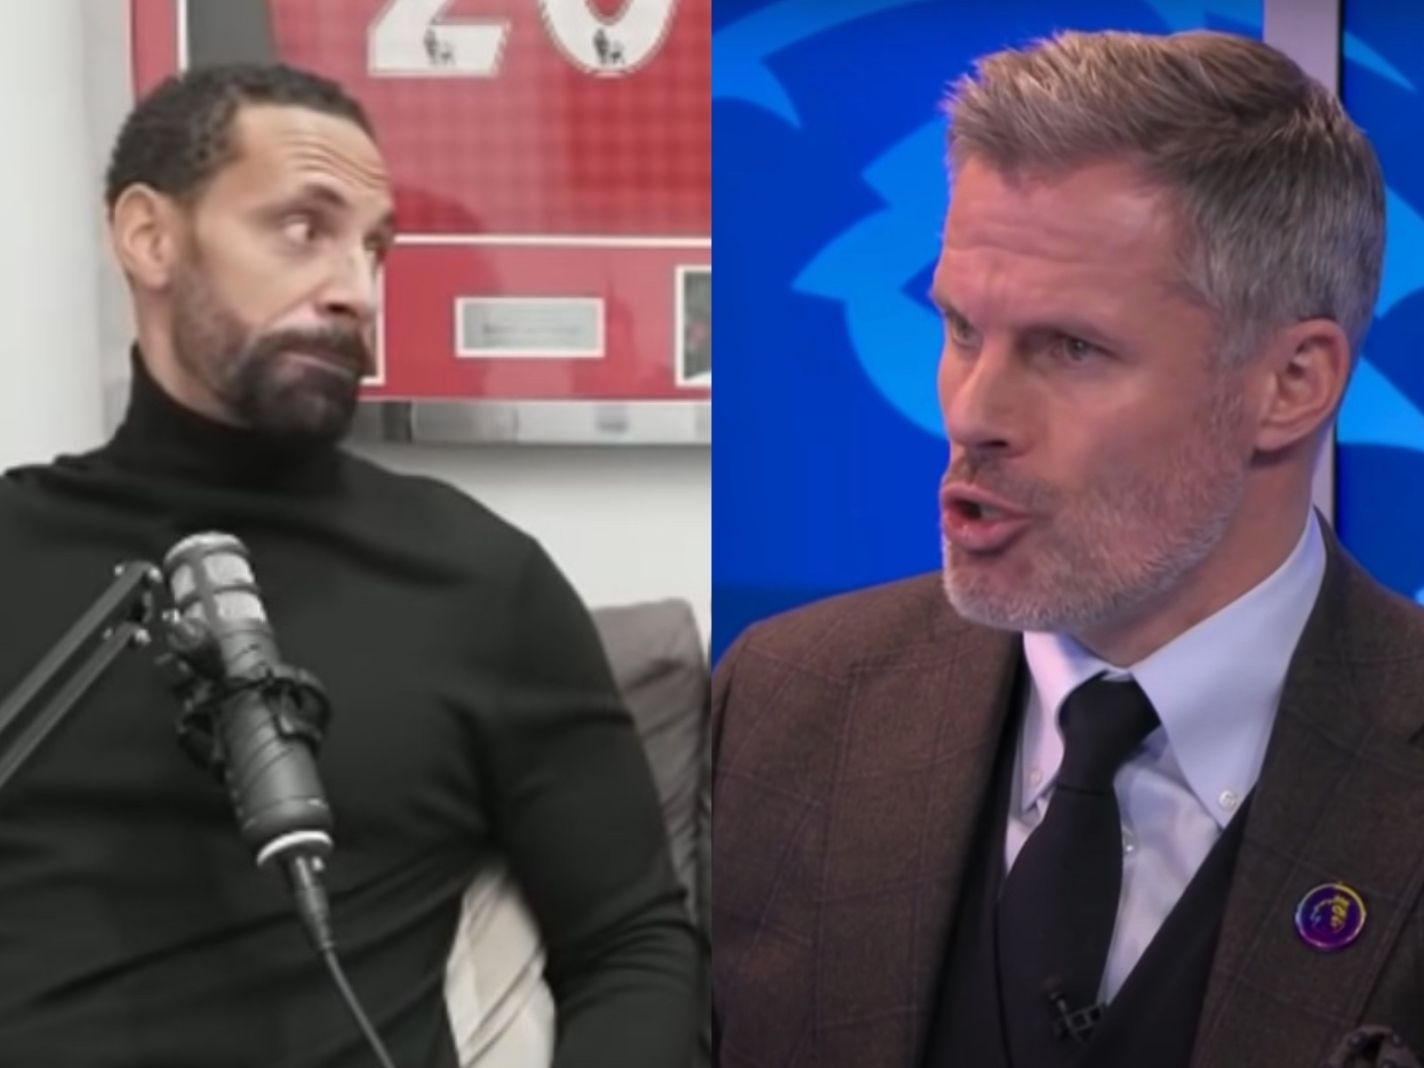 Twitter beef between Jamie Carragher and Rio Ferdinand spirals out of control before wholesome ending